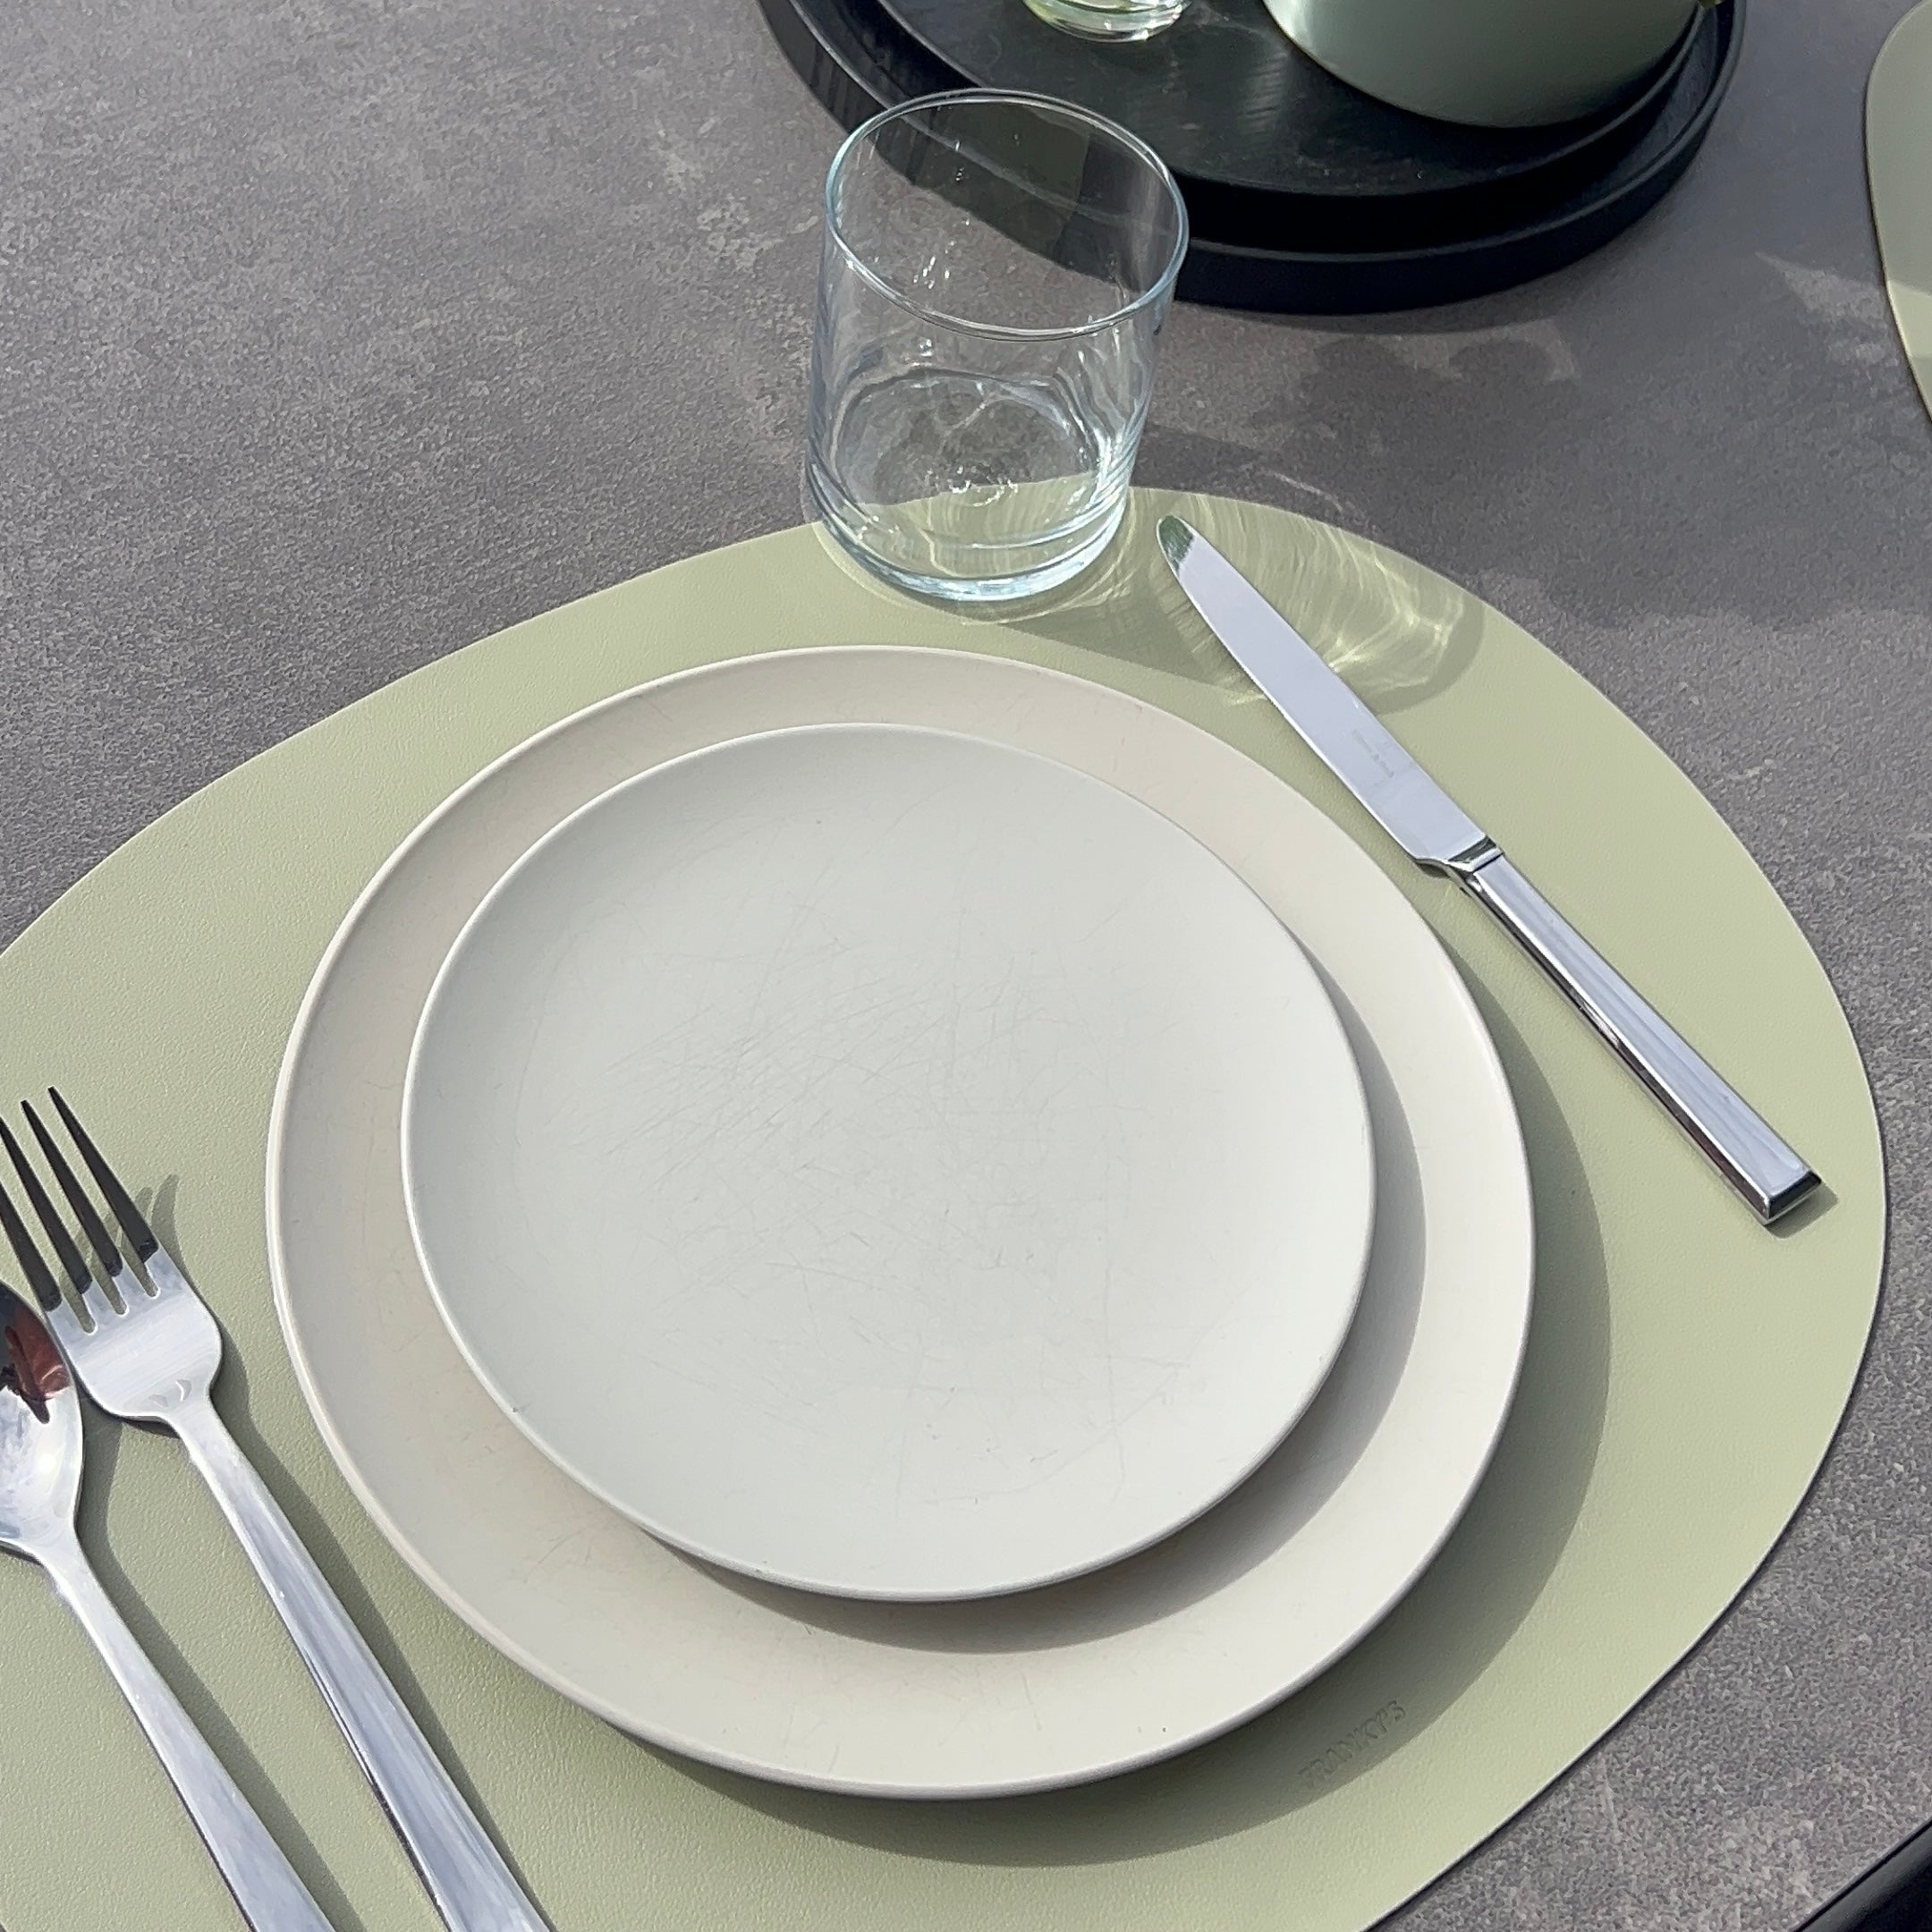 Lorient Grande Placemat - Buy Placemats Online at FRANKY'S